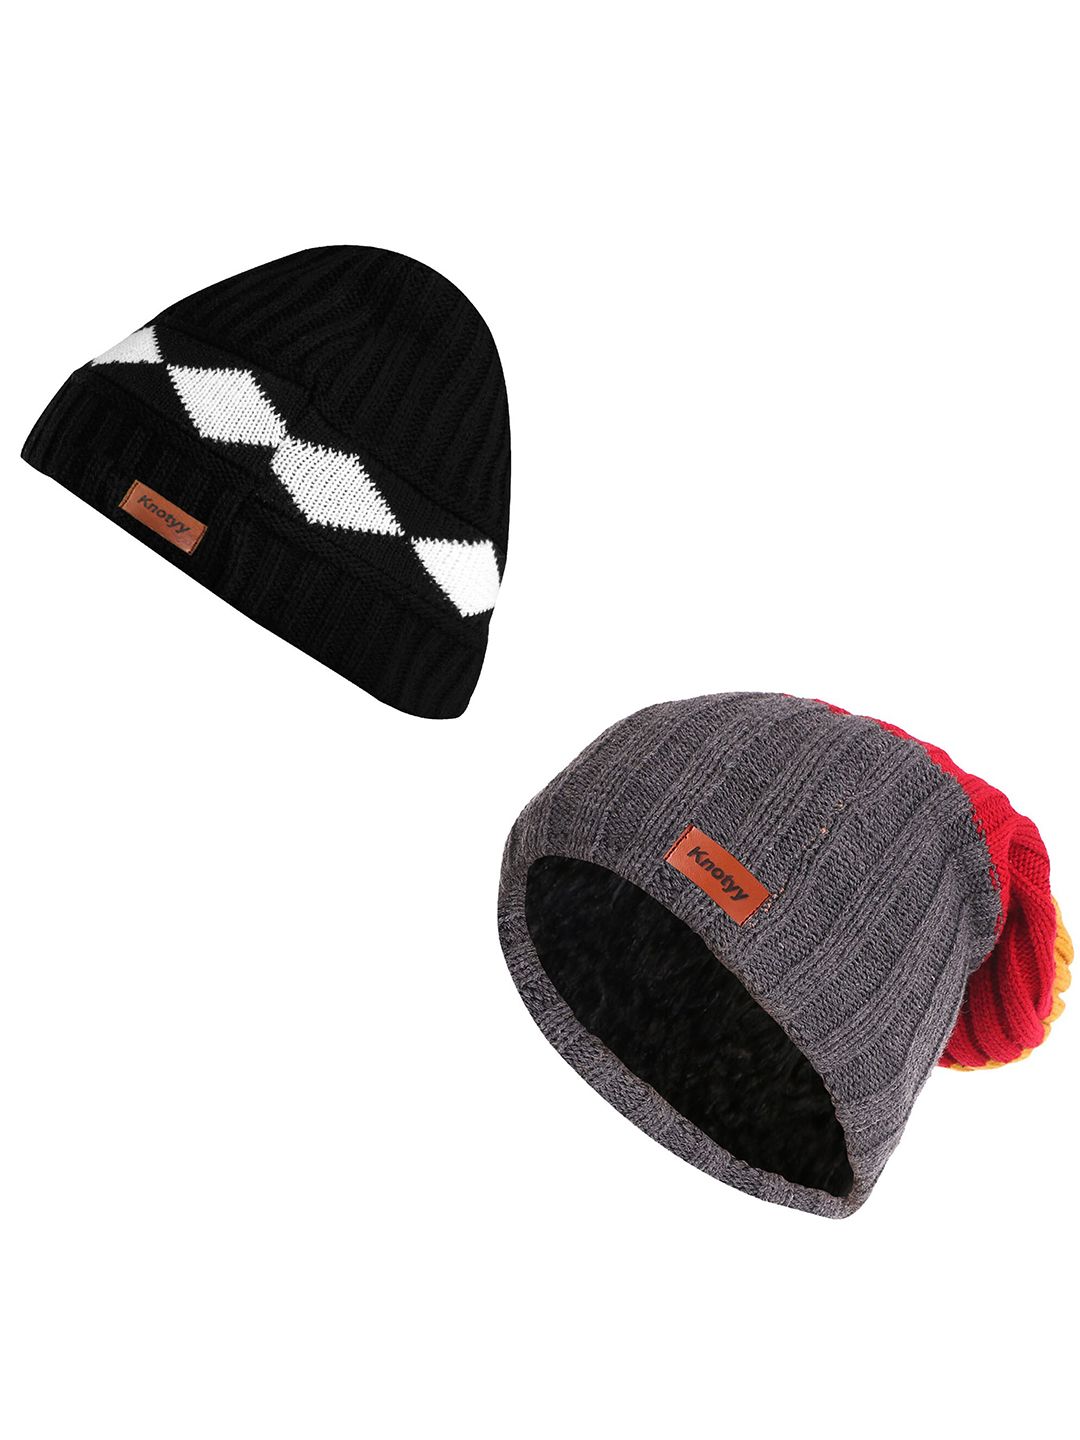 Knotyy Unisex Pack of 2 Grey & Black Acrylic Beanies Price in India